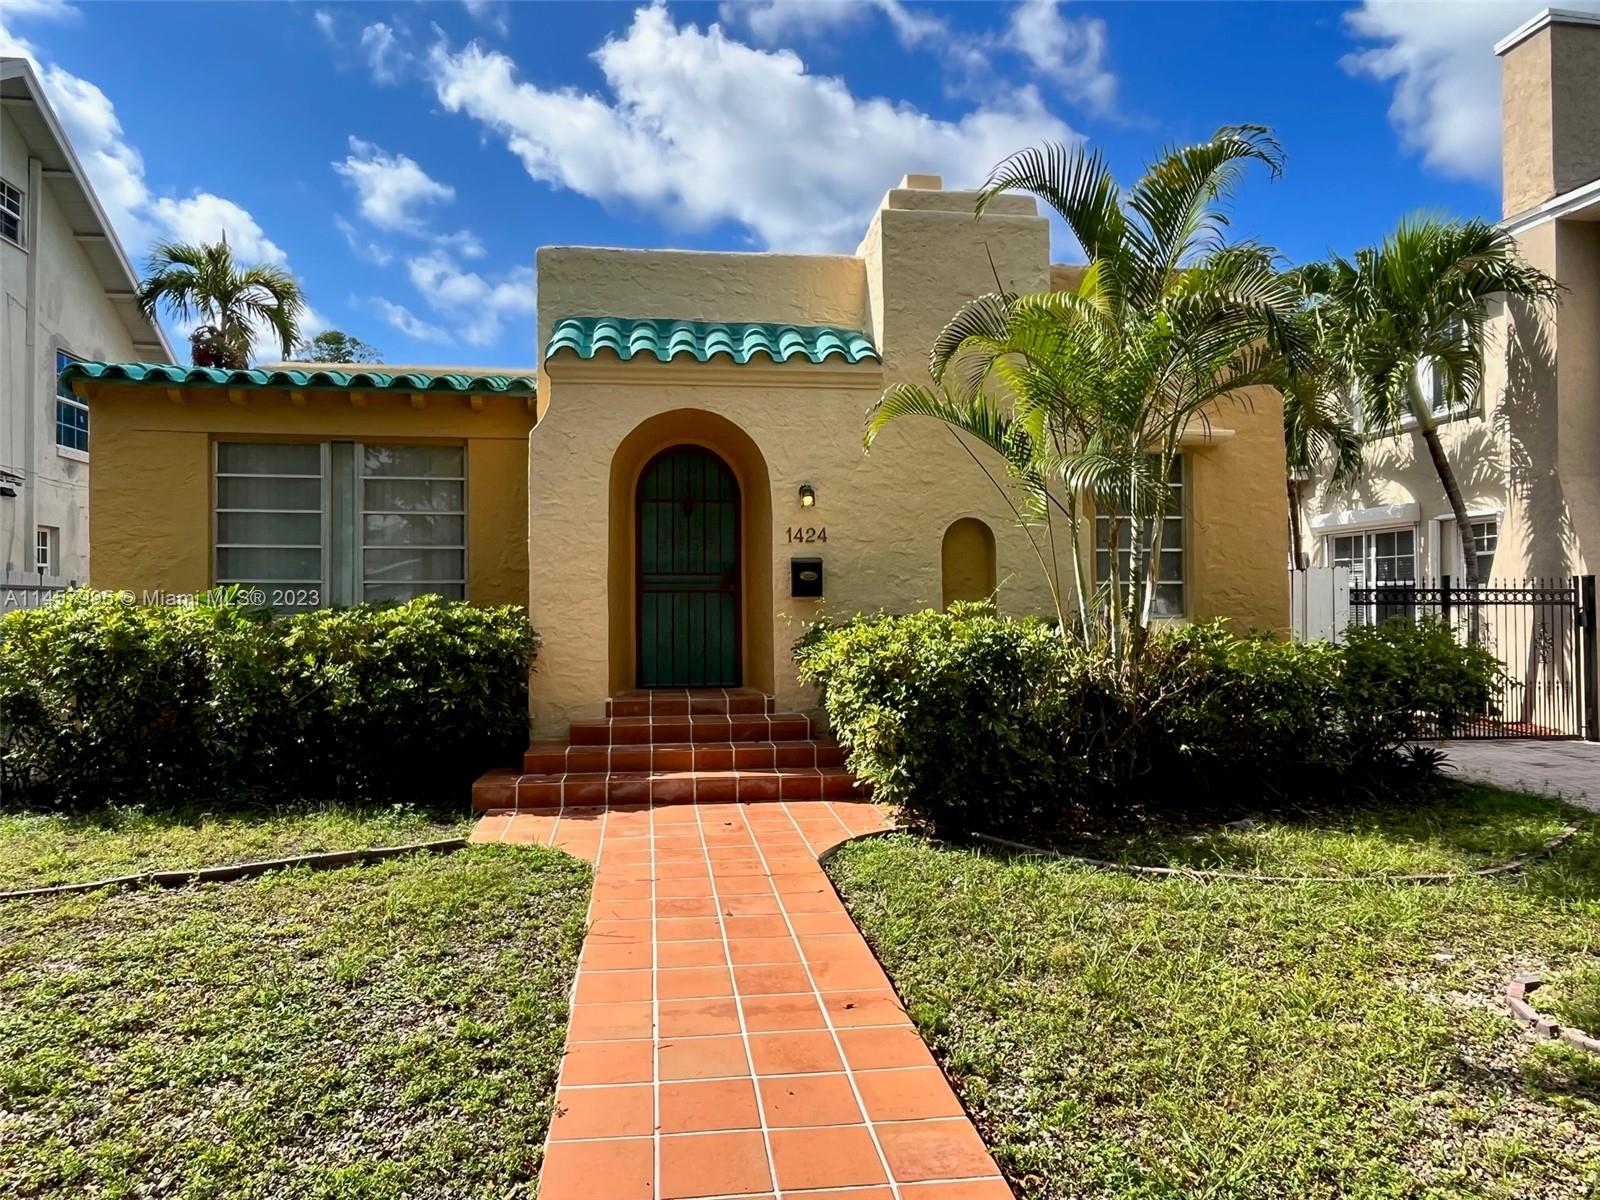 Beautiful Spanish house with a in law cottage in the back yard, five minute to Brickell center and downtown.
The house has Airbnb income producing possibility because its located in a historical neighborhood.
contact the listing agent for showing.